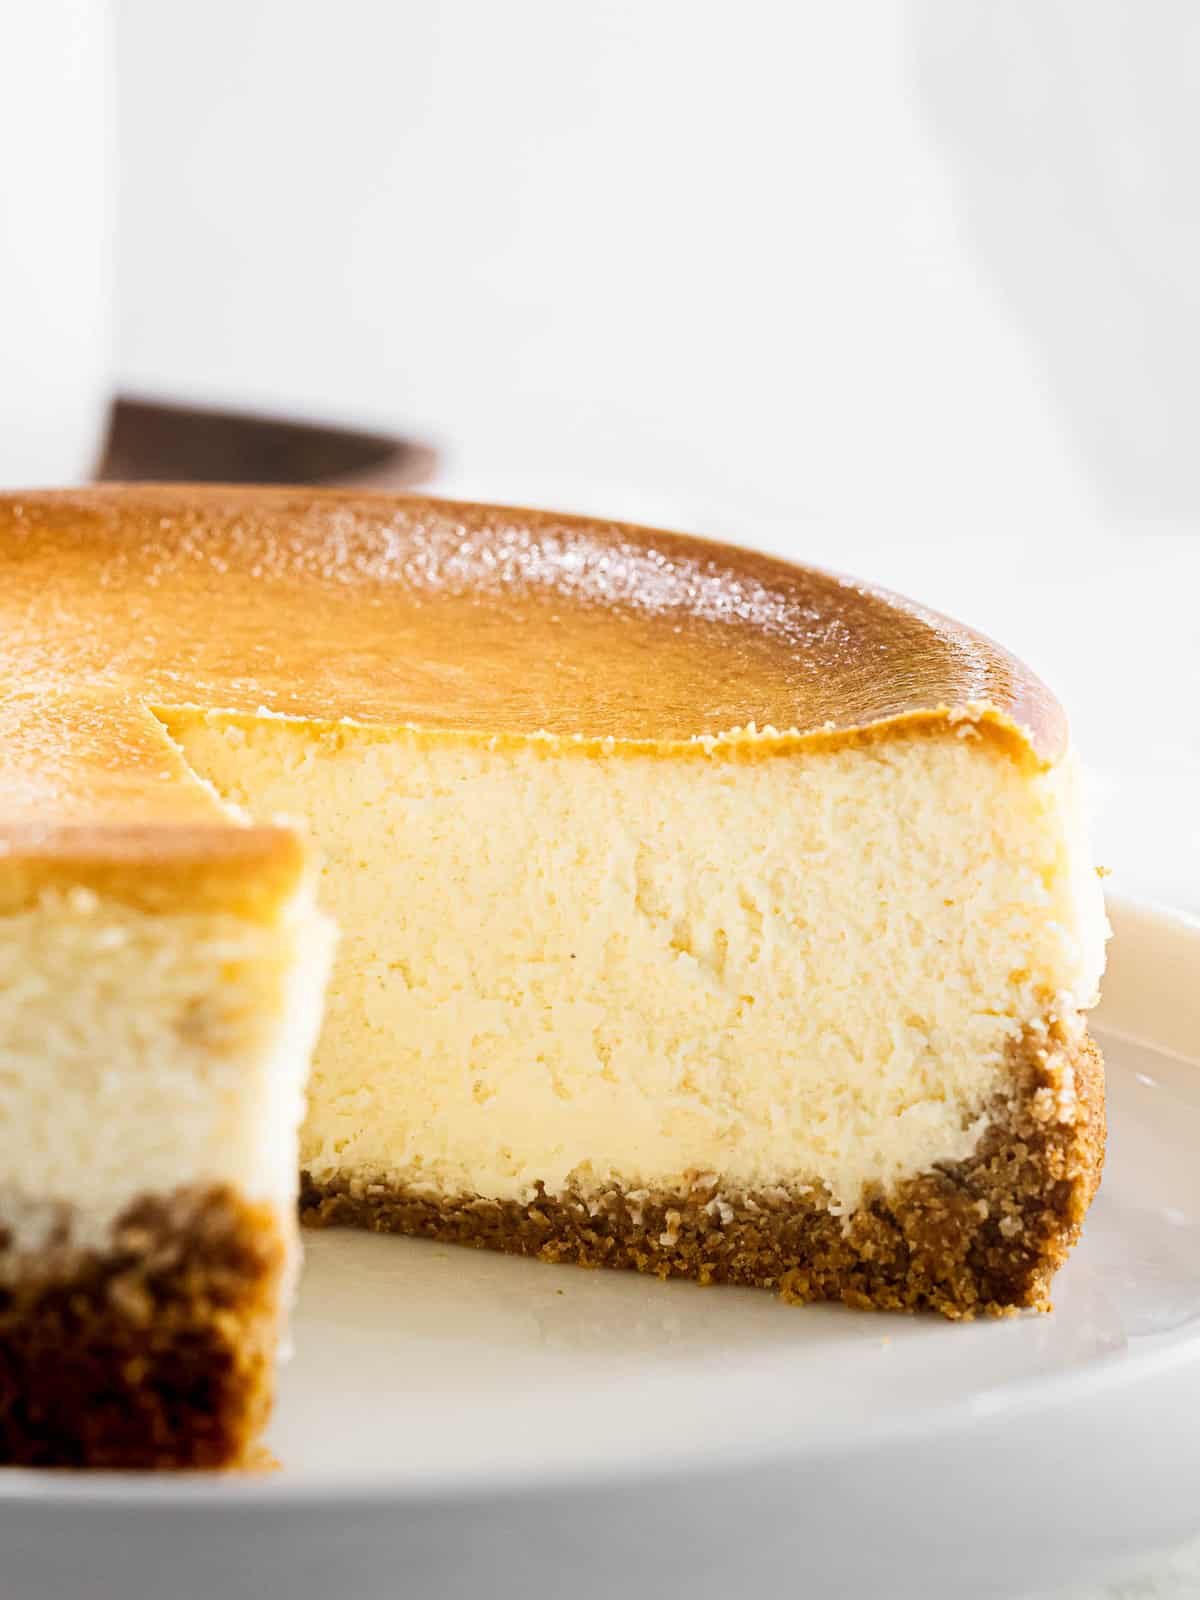 Classic New York cheesecake with creamy, rich texture.